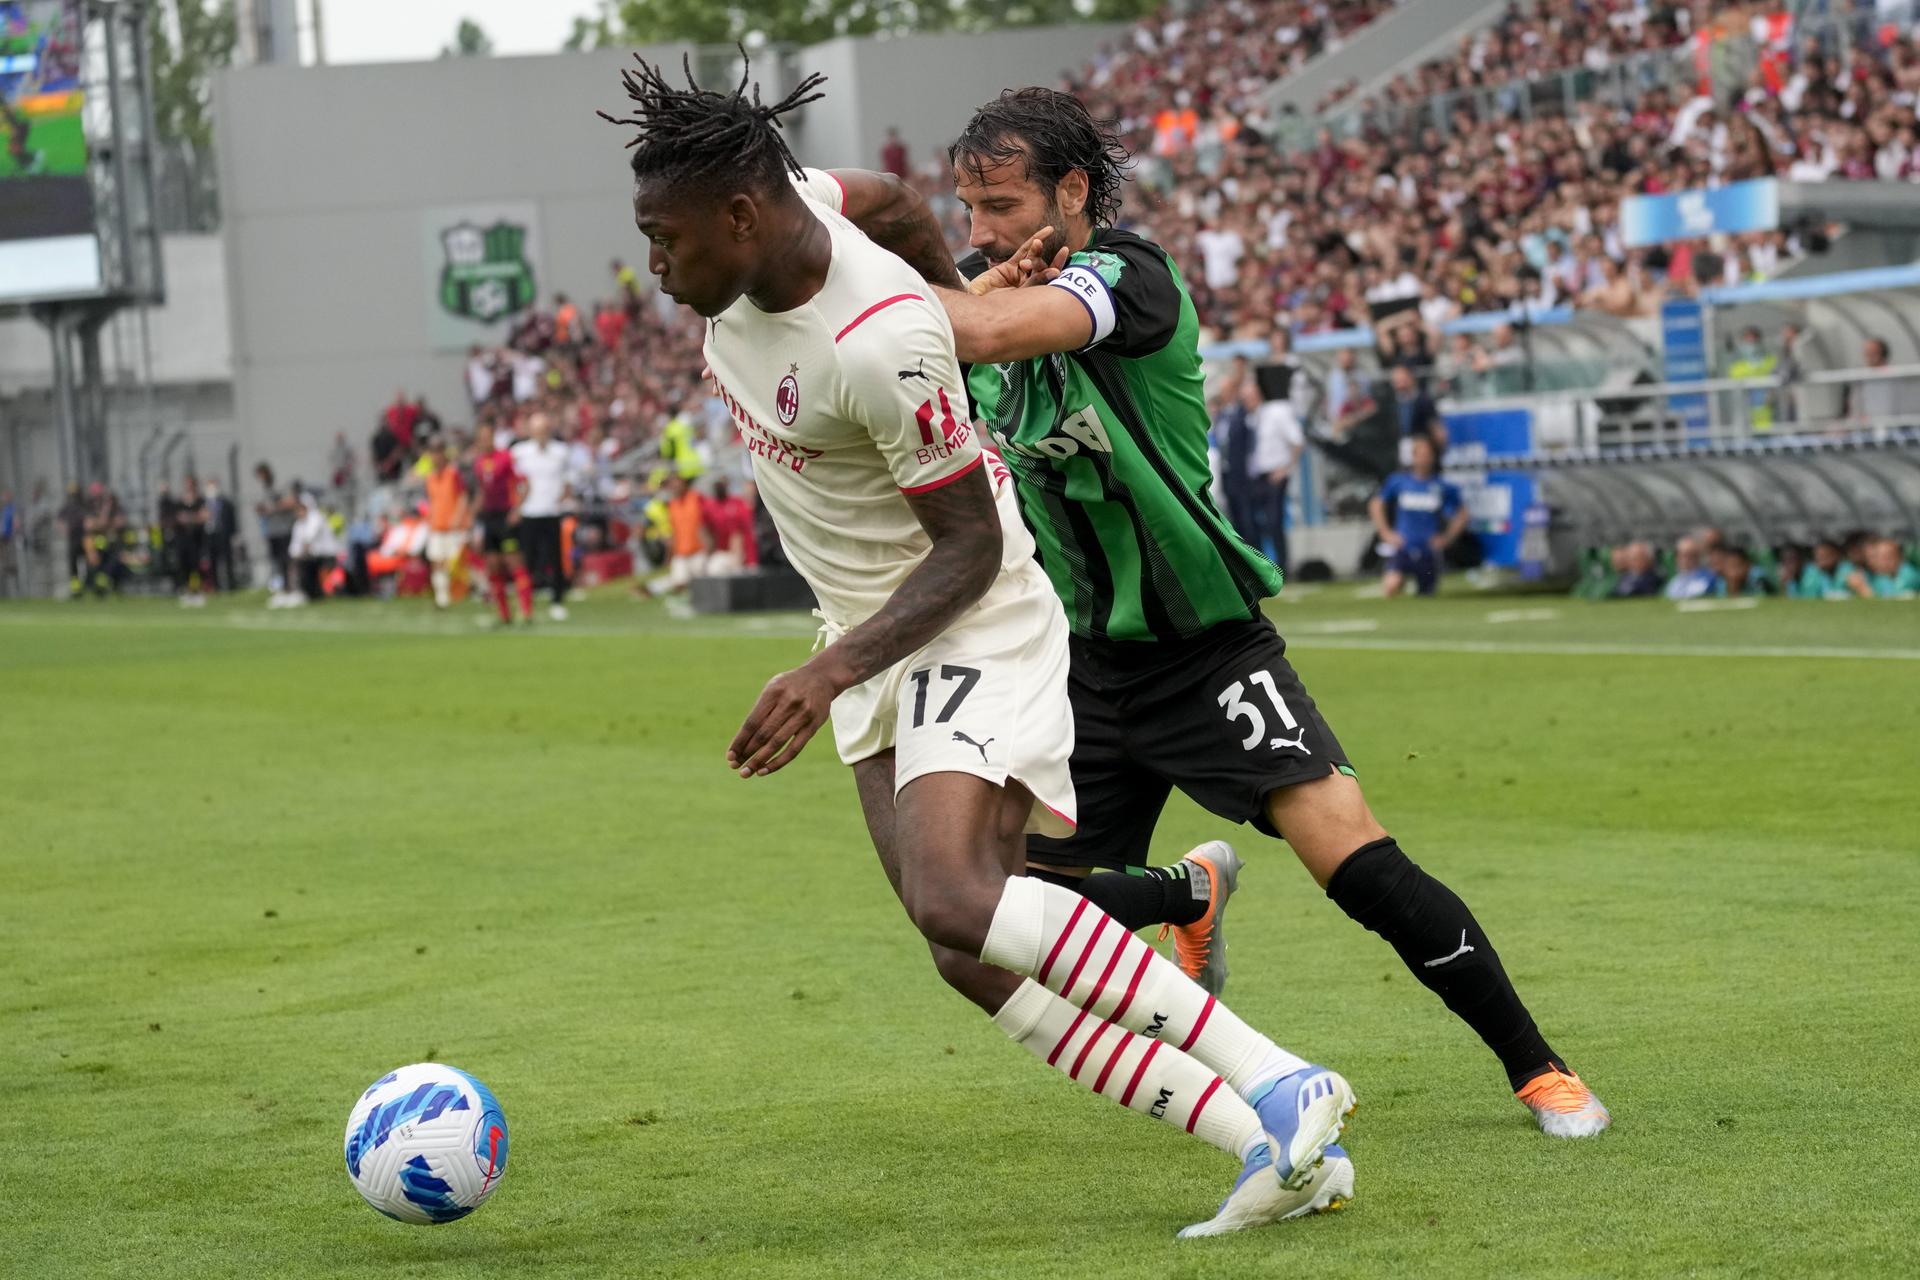 Sassuolo vs. US Cremonese Predictions, Betting Odds, and Picks - Sunday, September 4, 2022